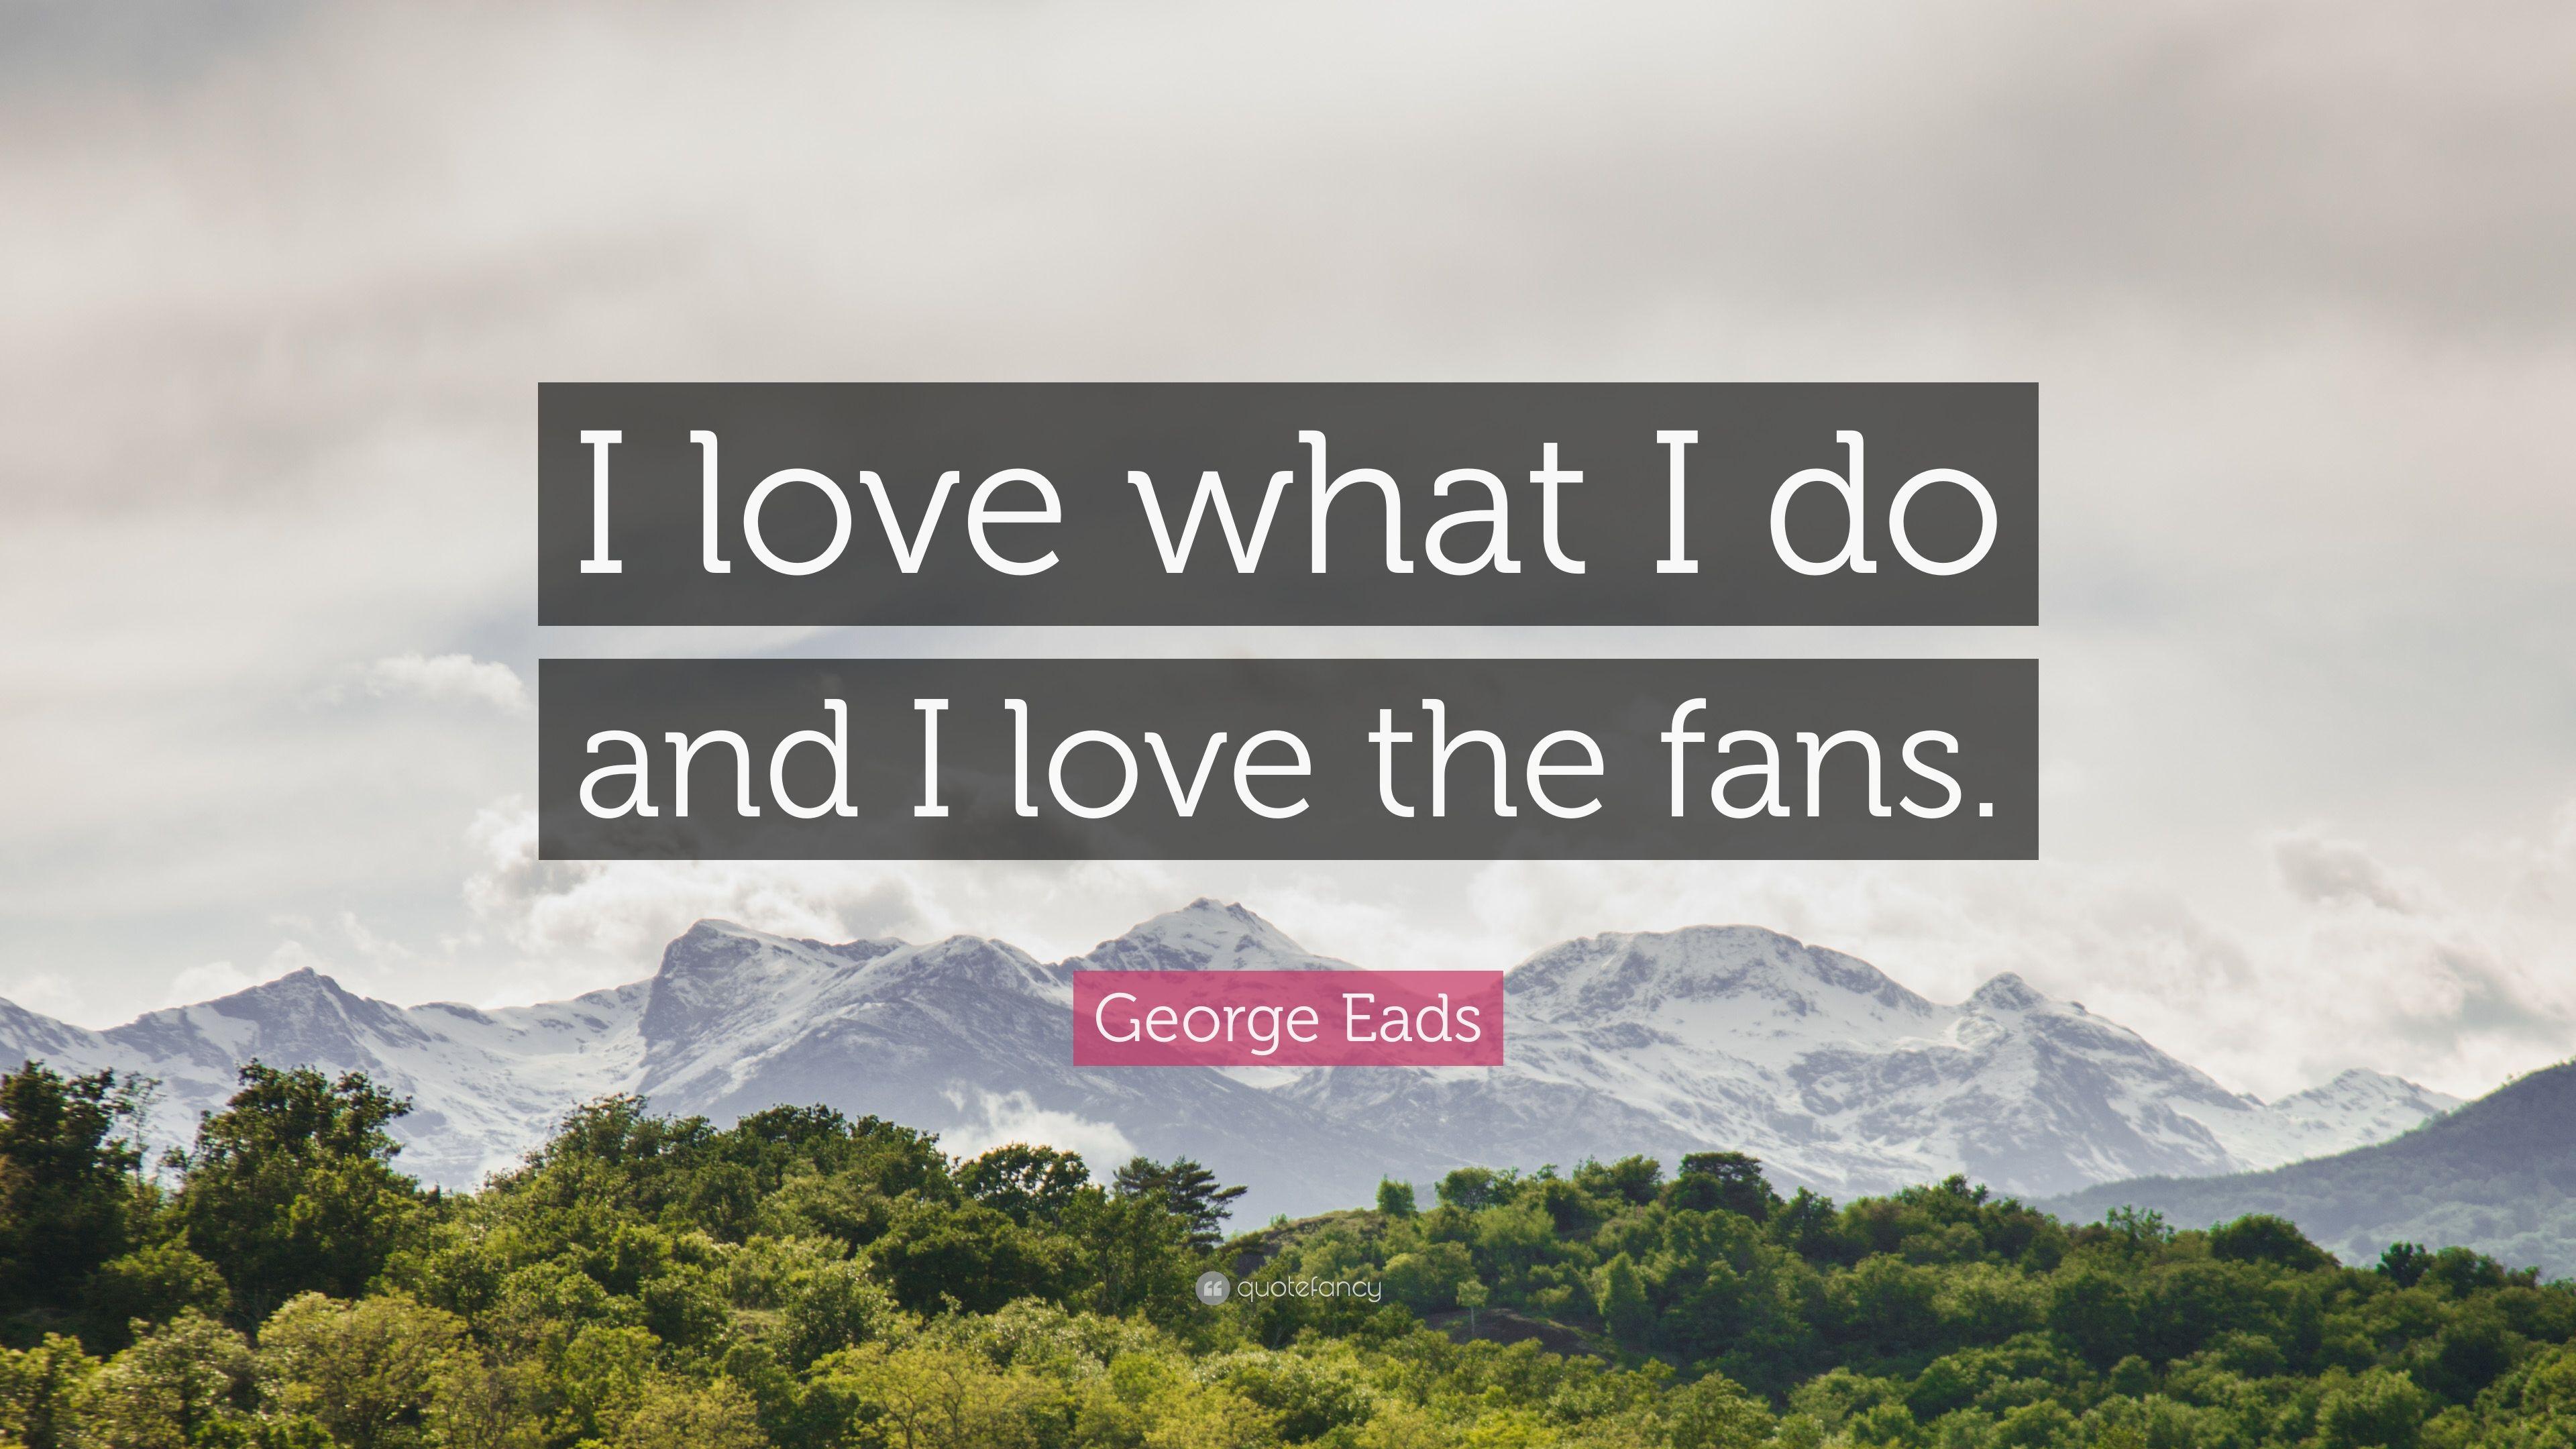 George Eads Quote: “I love what I do and I love the fans.” 7